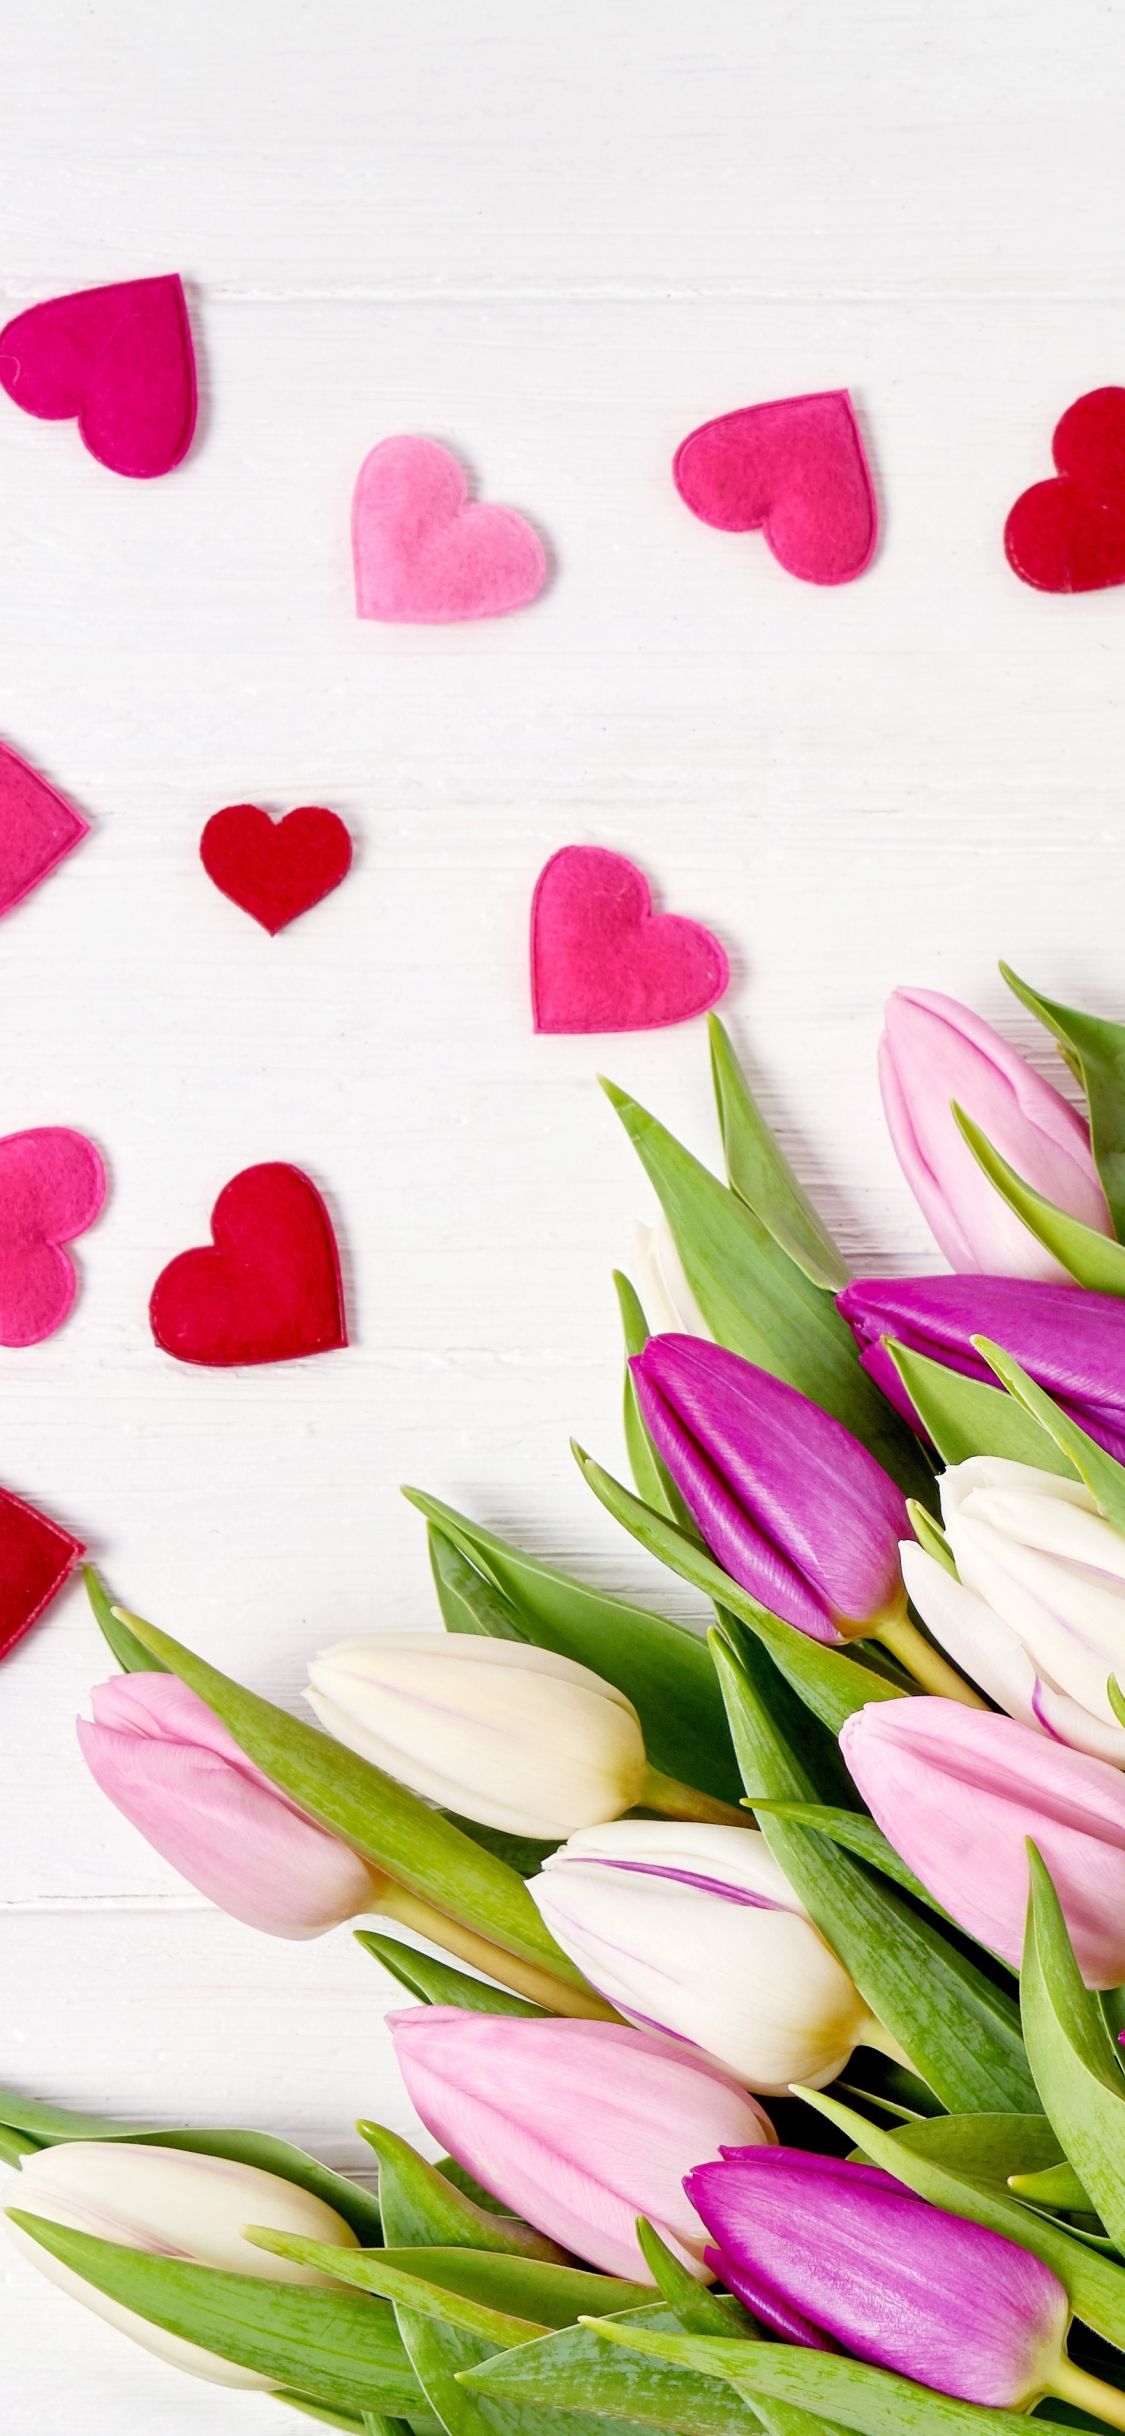 Download 1125x2436 wallpaper heart, shapes, flowers, pink tulips